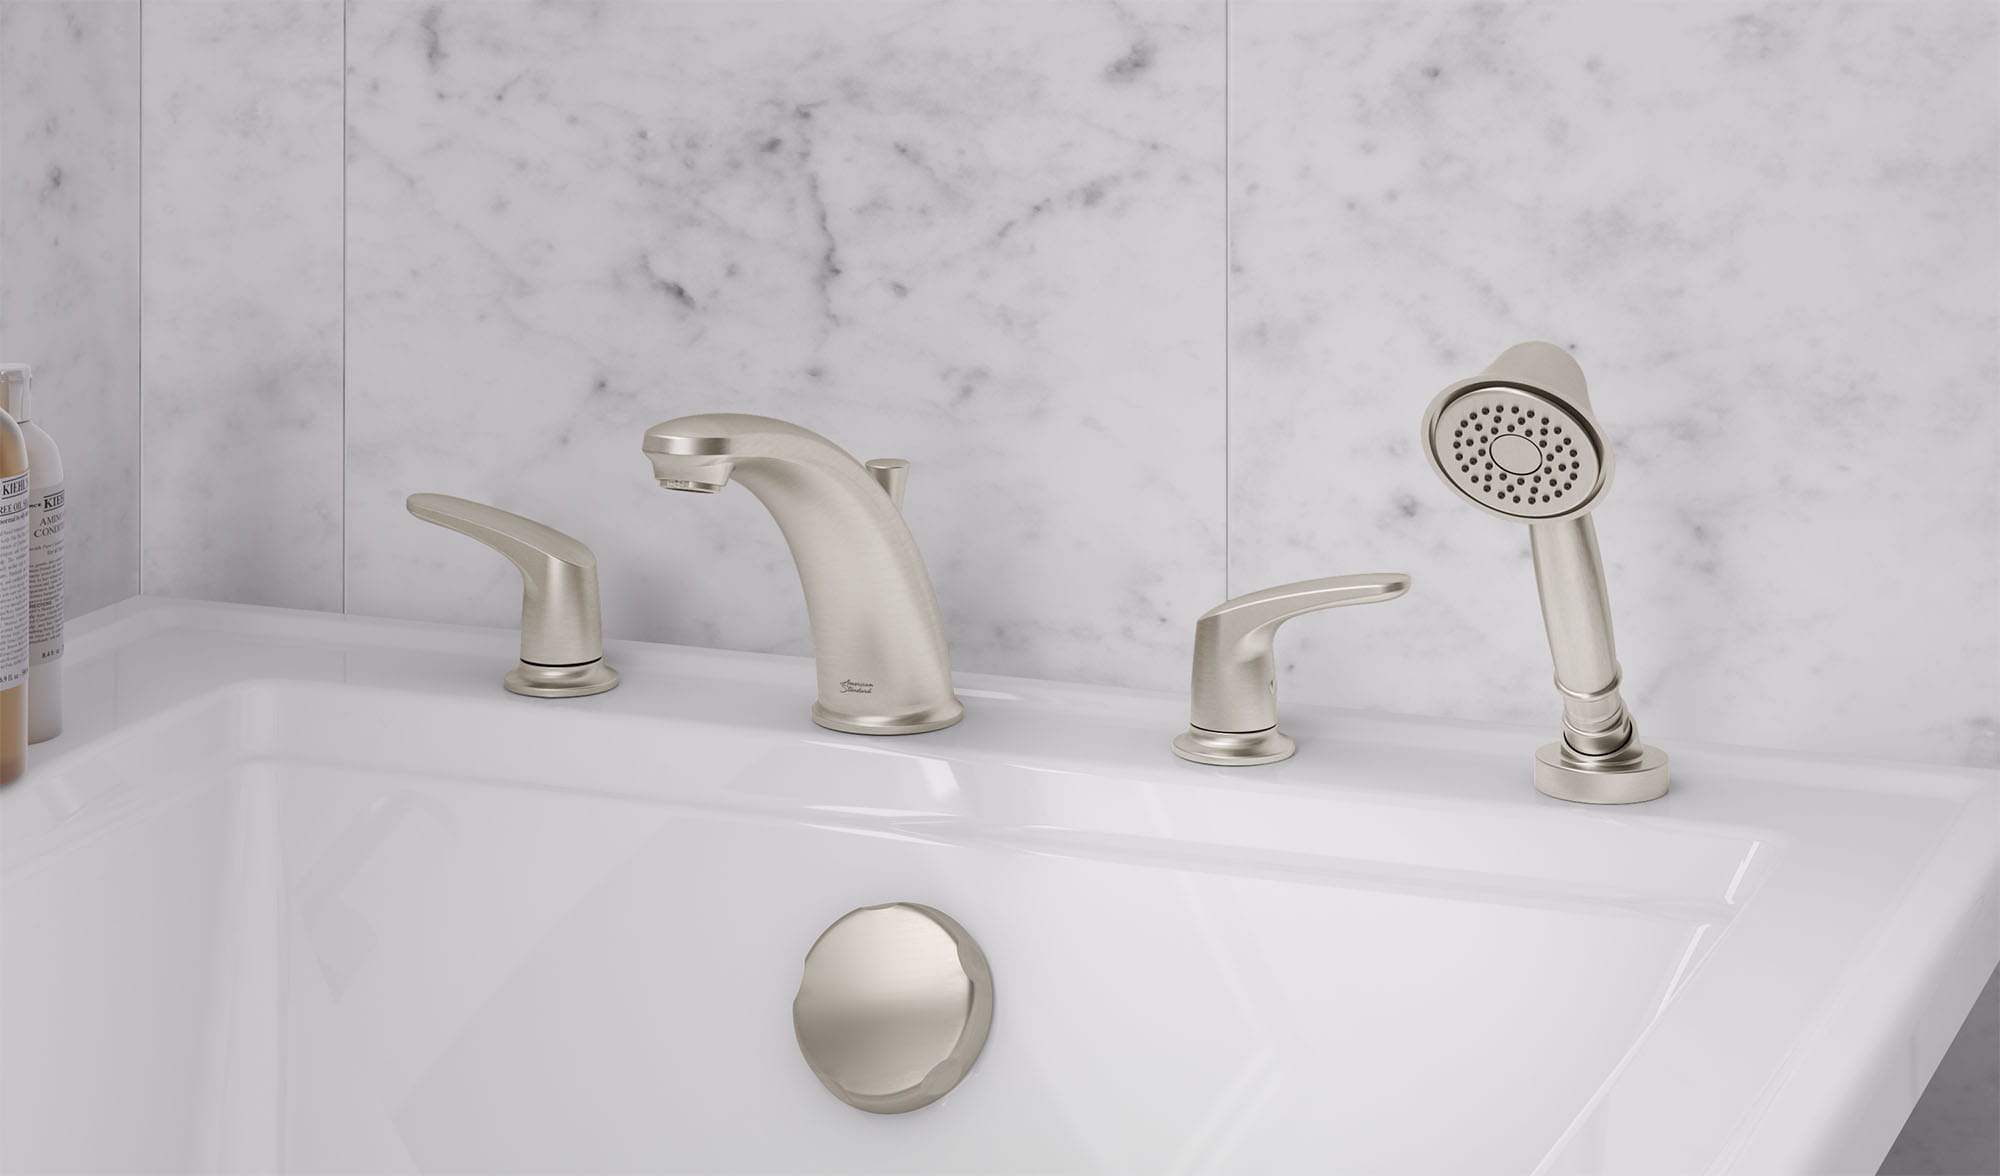 Colony® PRO Bathtub Faucet Trim With Lever Handles and Personal Shower for Flash® Rough-In Valve